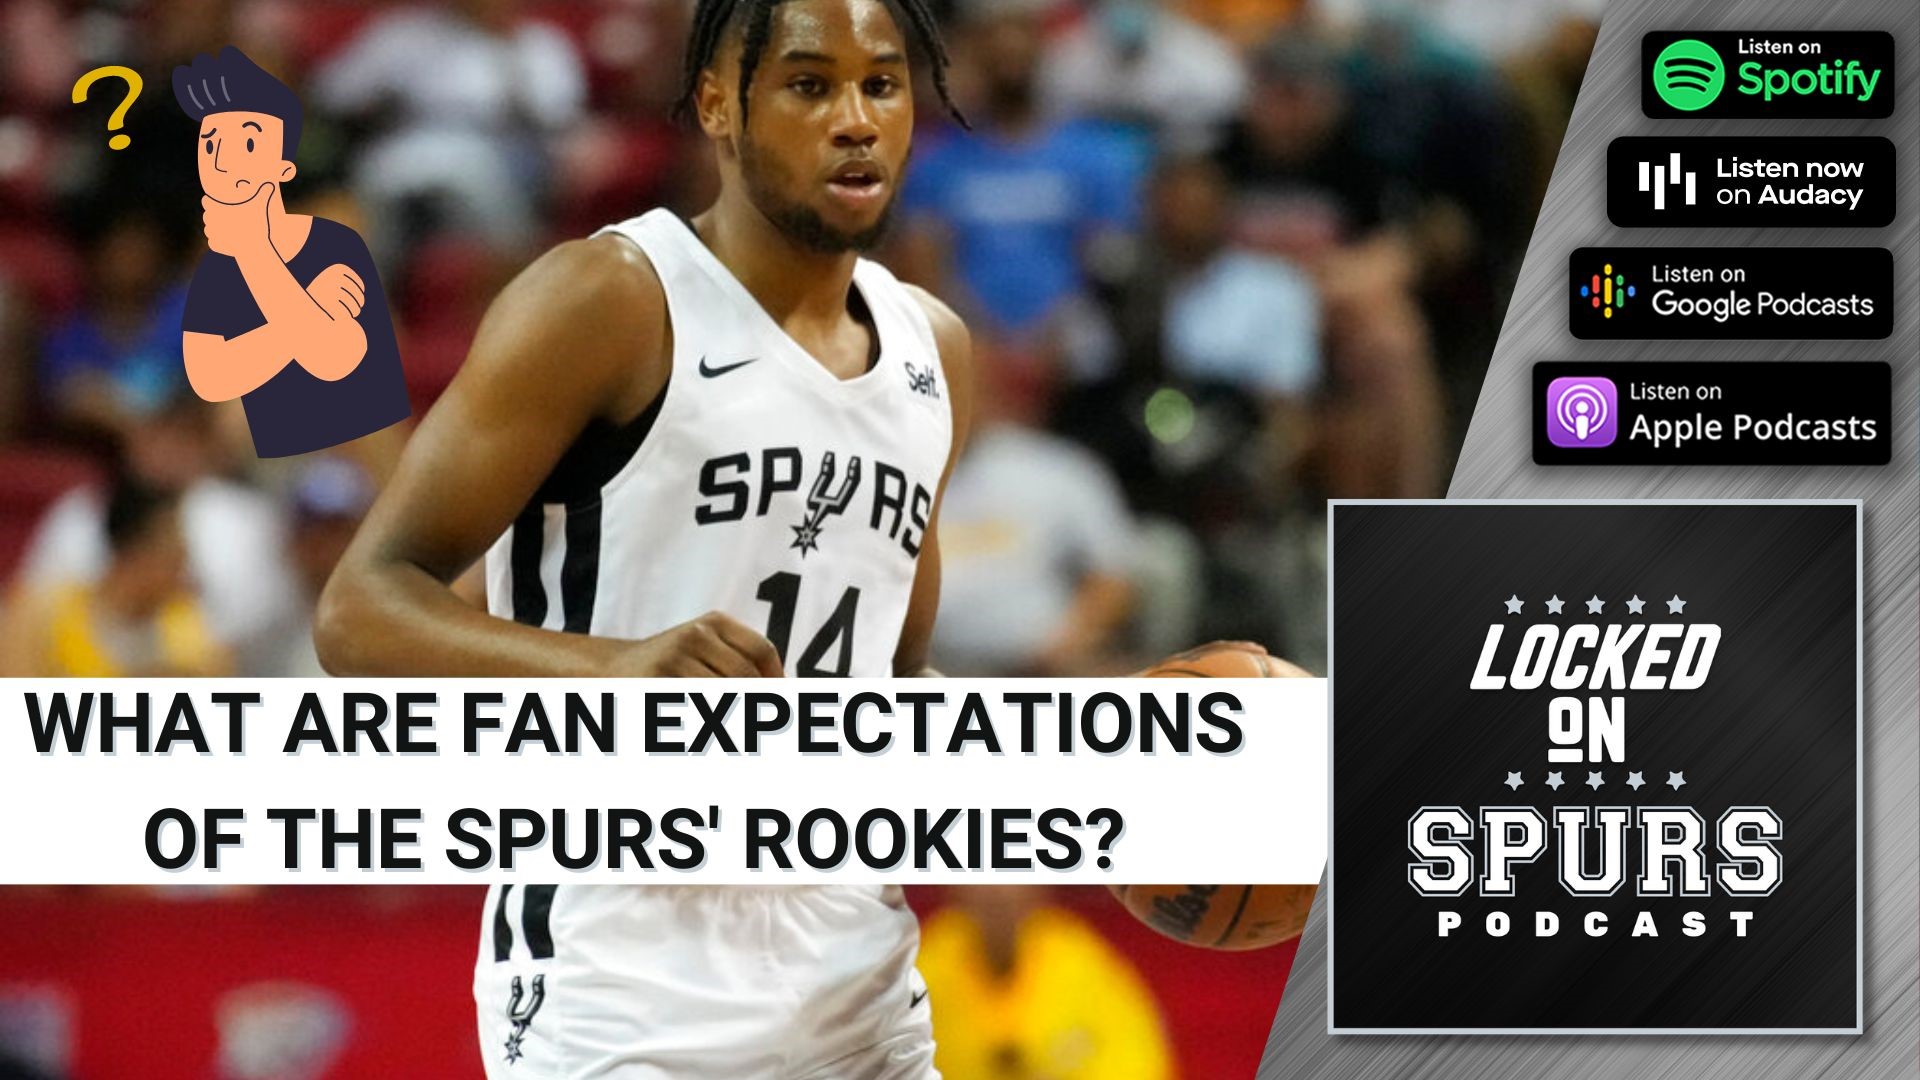 Do fans have high or low expectations from the Spurs' rookies next season?